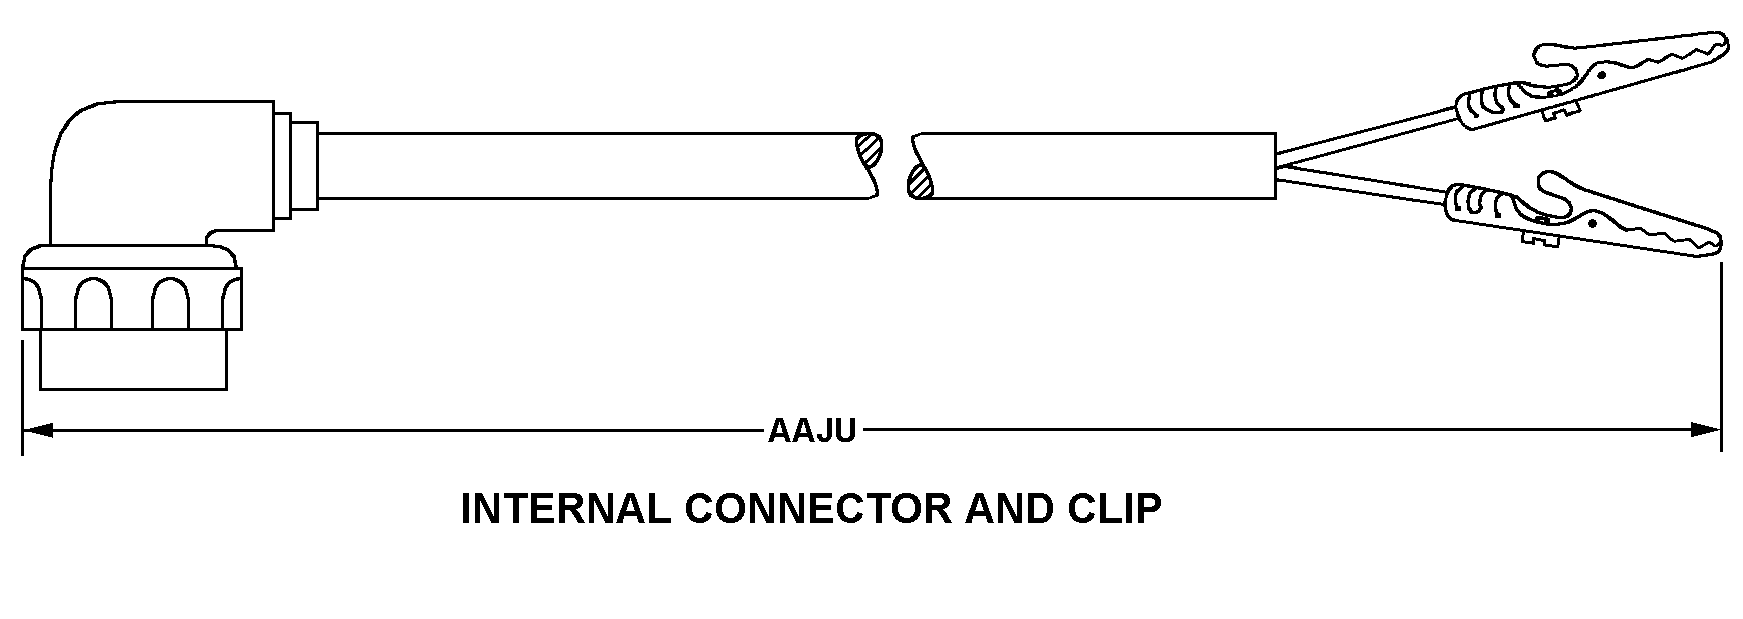 INTERNAL CONNECTOR AND CLIP style nsn 6150-01-512-3879